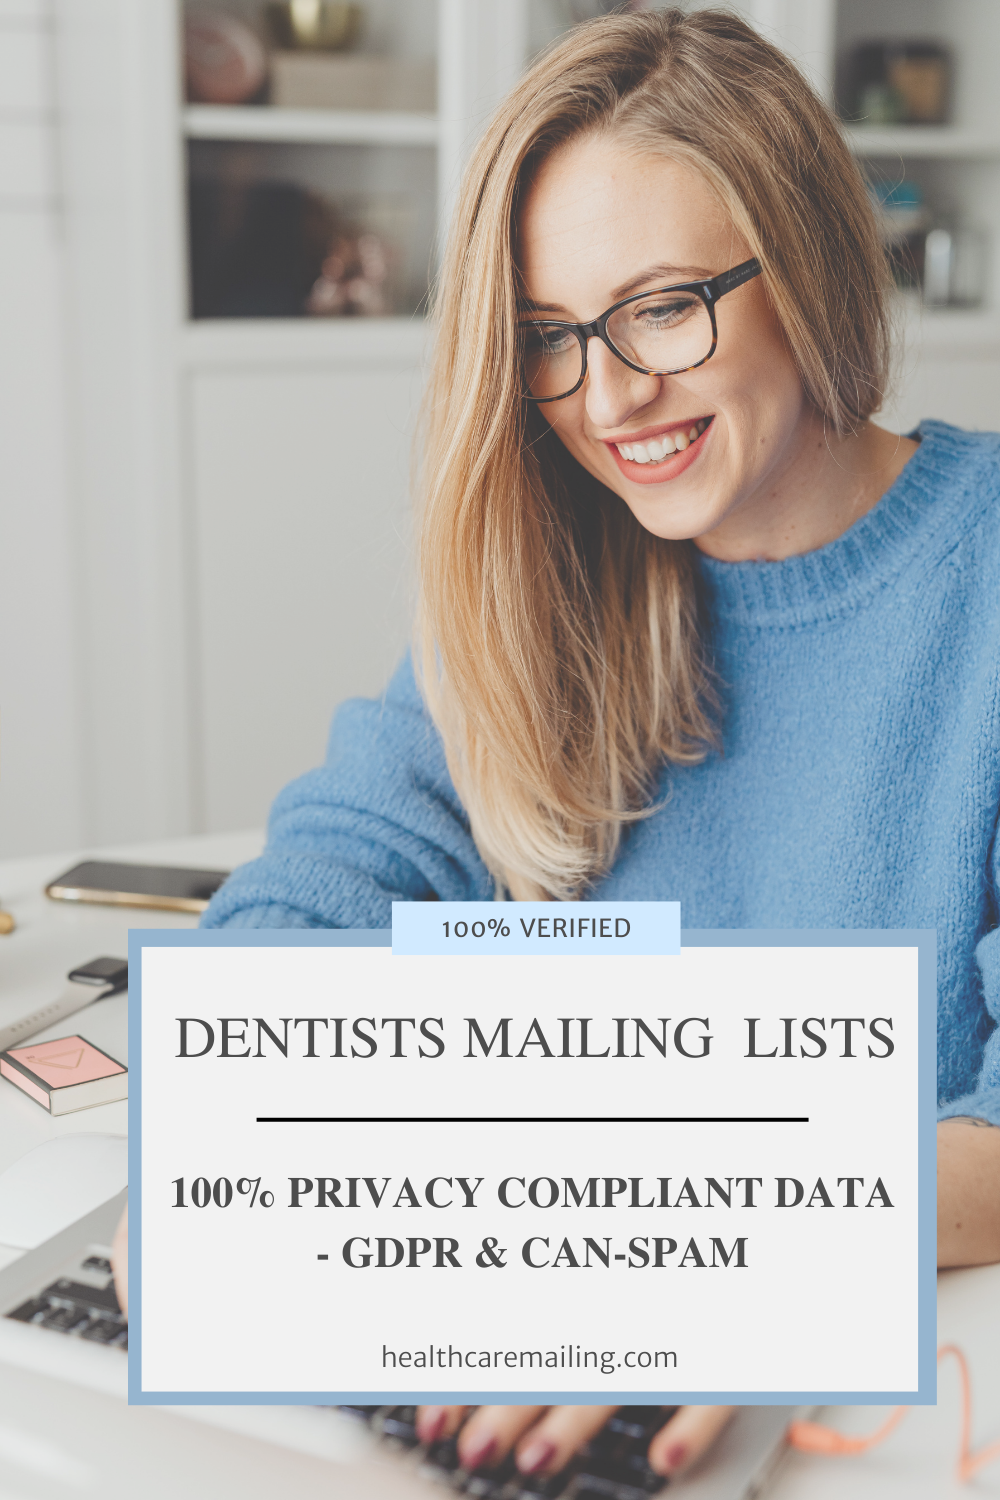 7 Benefits of Purchasing a Dentist Email List